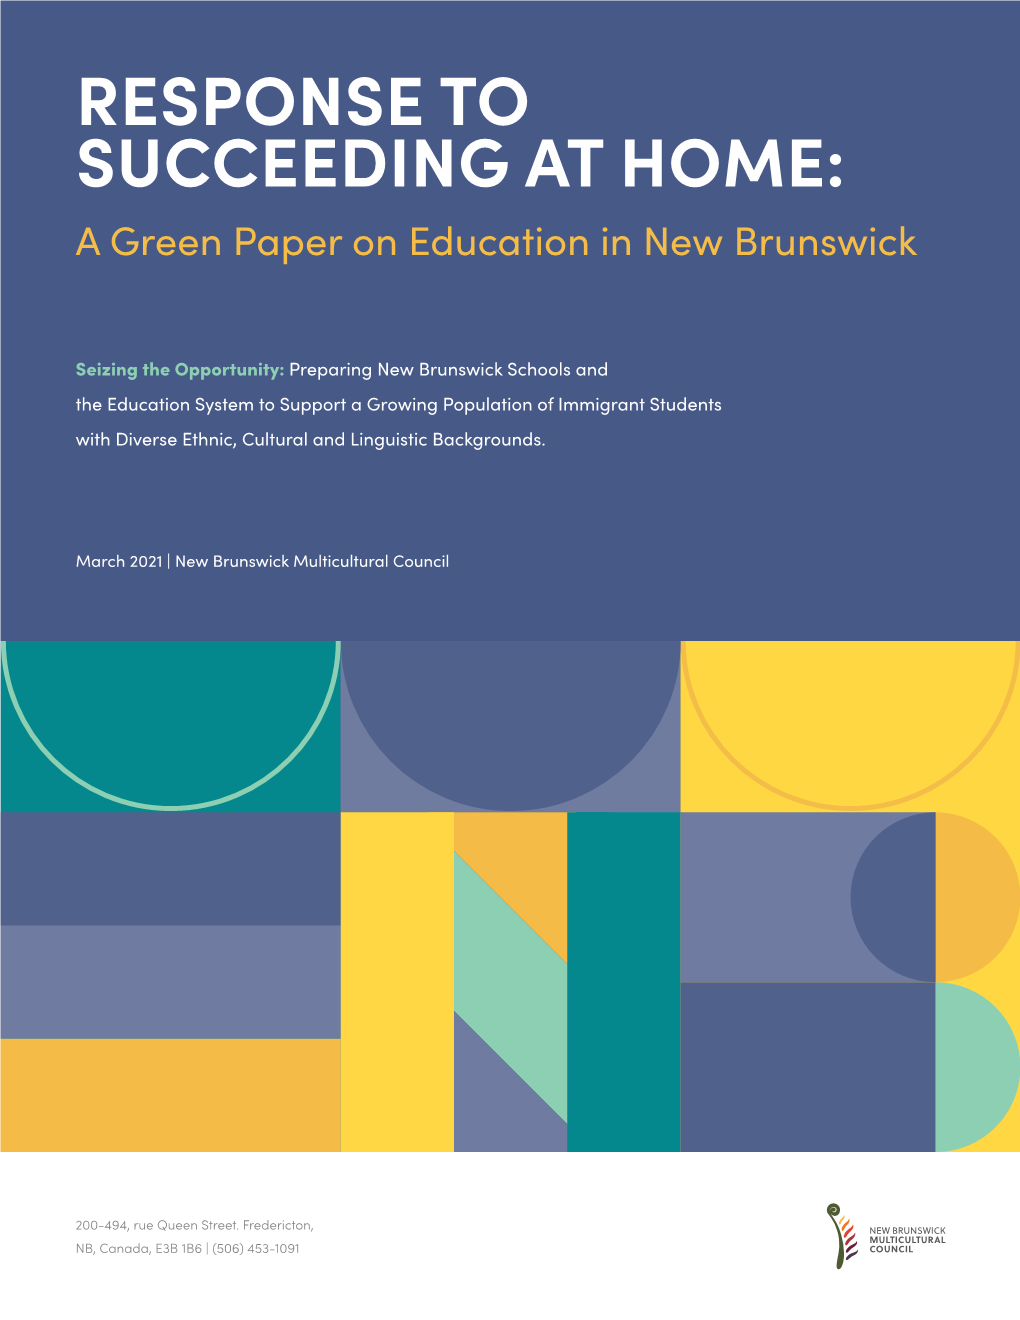 RESPONSE to SUCCEEDING at HOME: a Green Paper on Education in New Brunswick